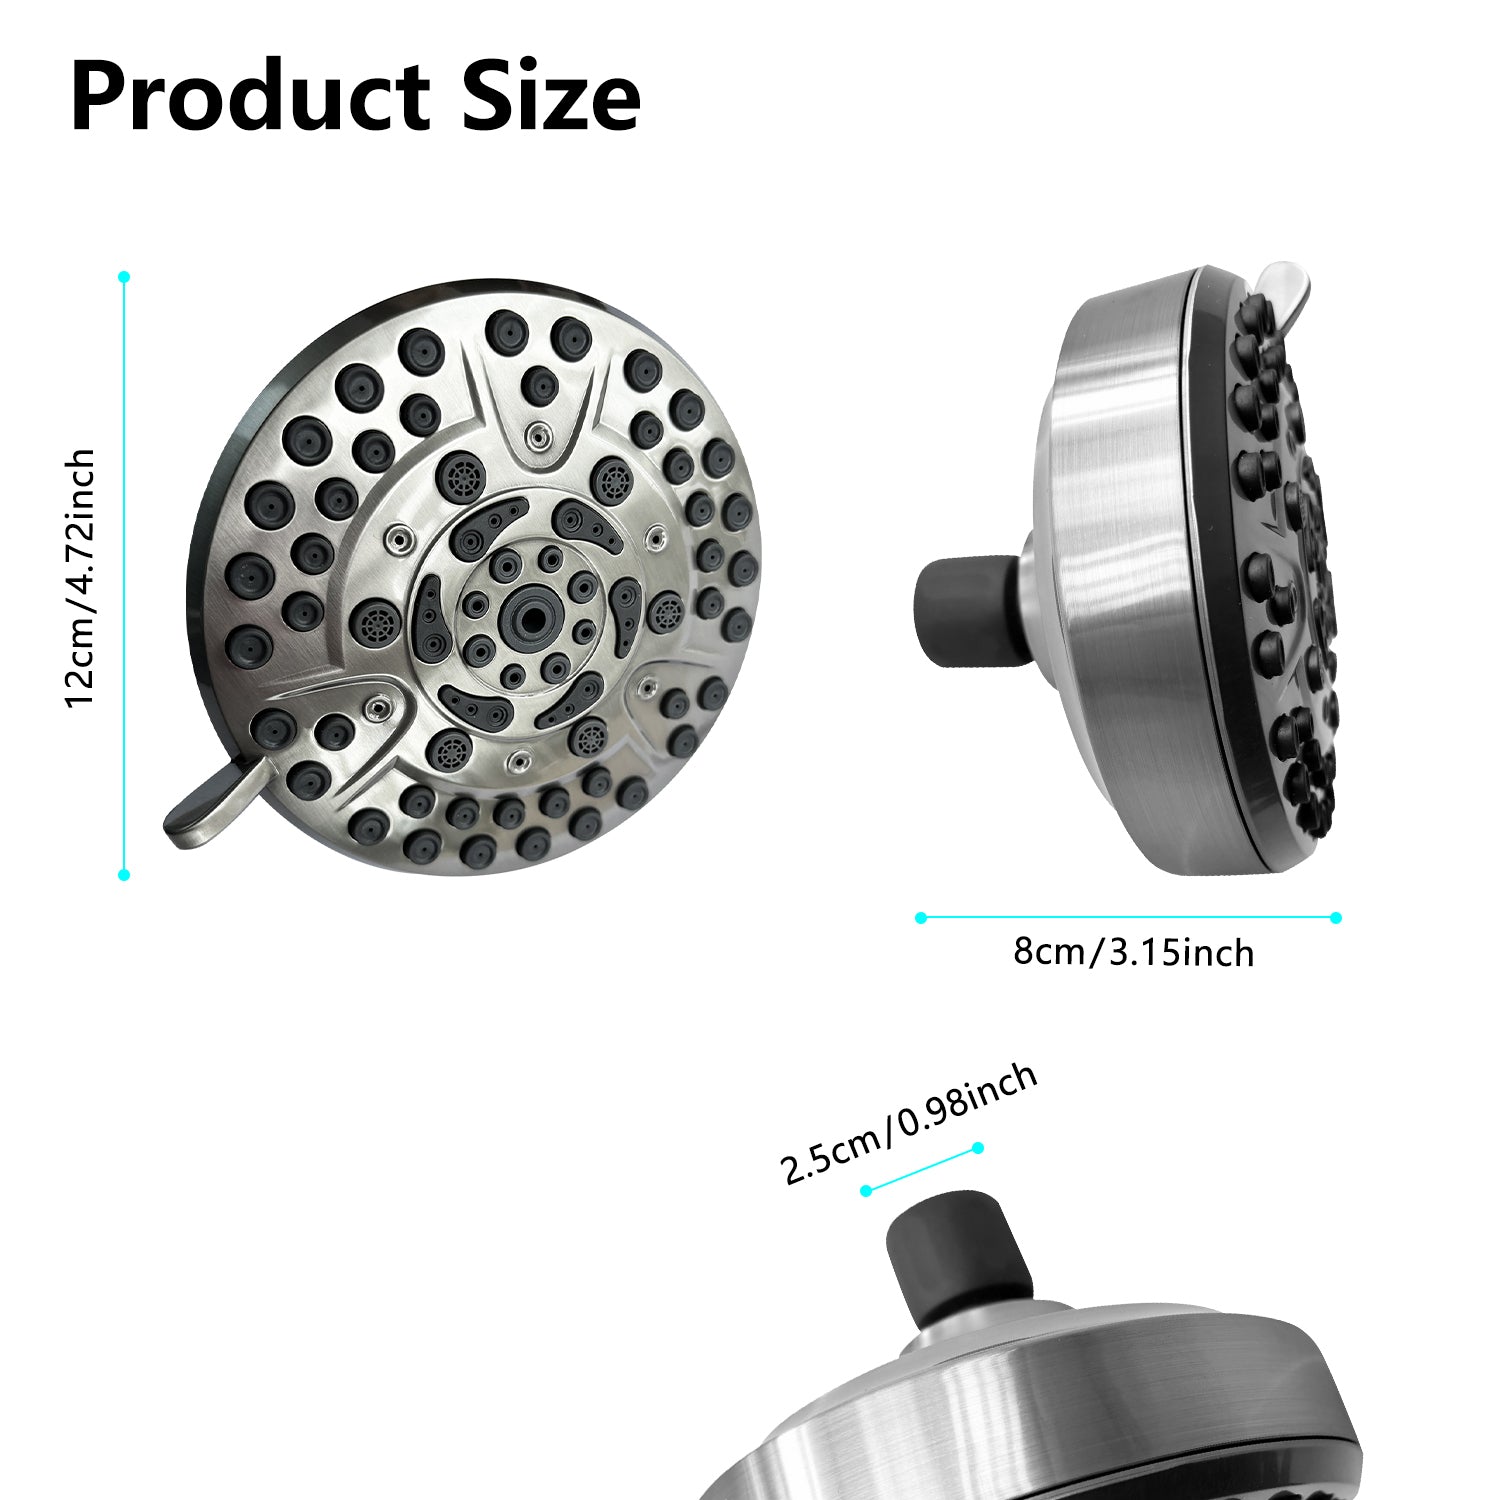 High Pressure Rain Shower Head With 10 Spray Modes brushed nickel-abs